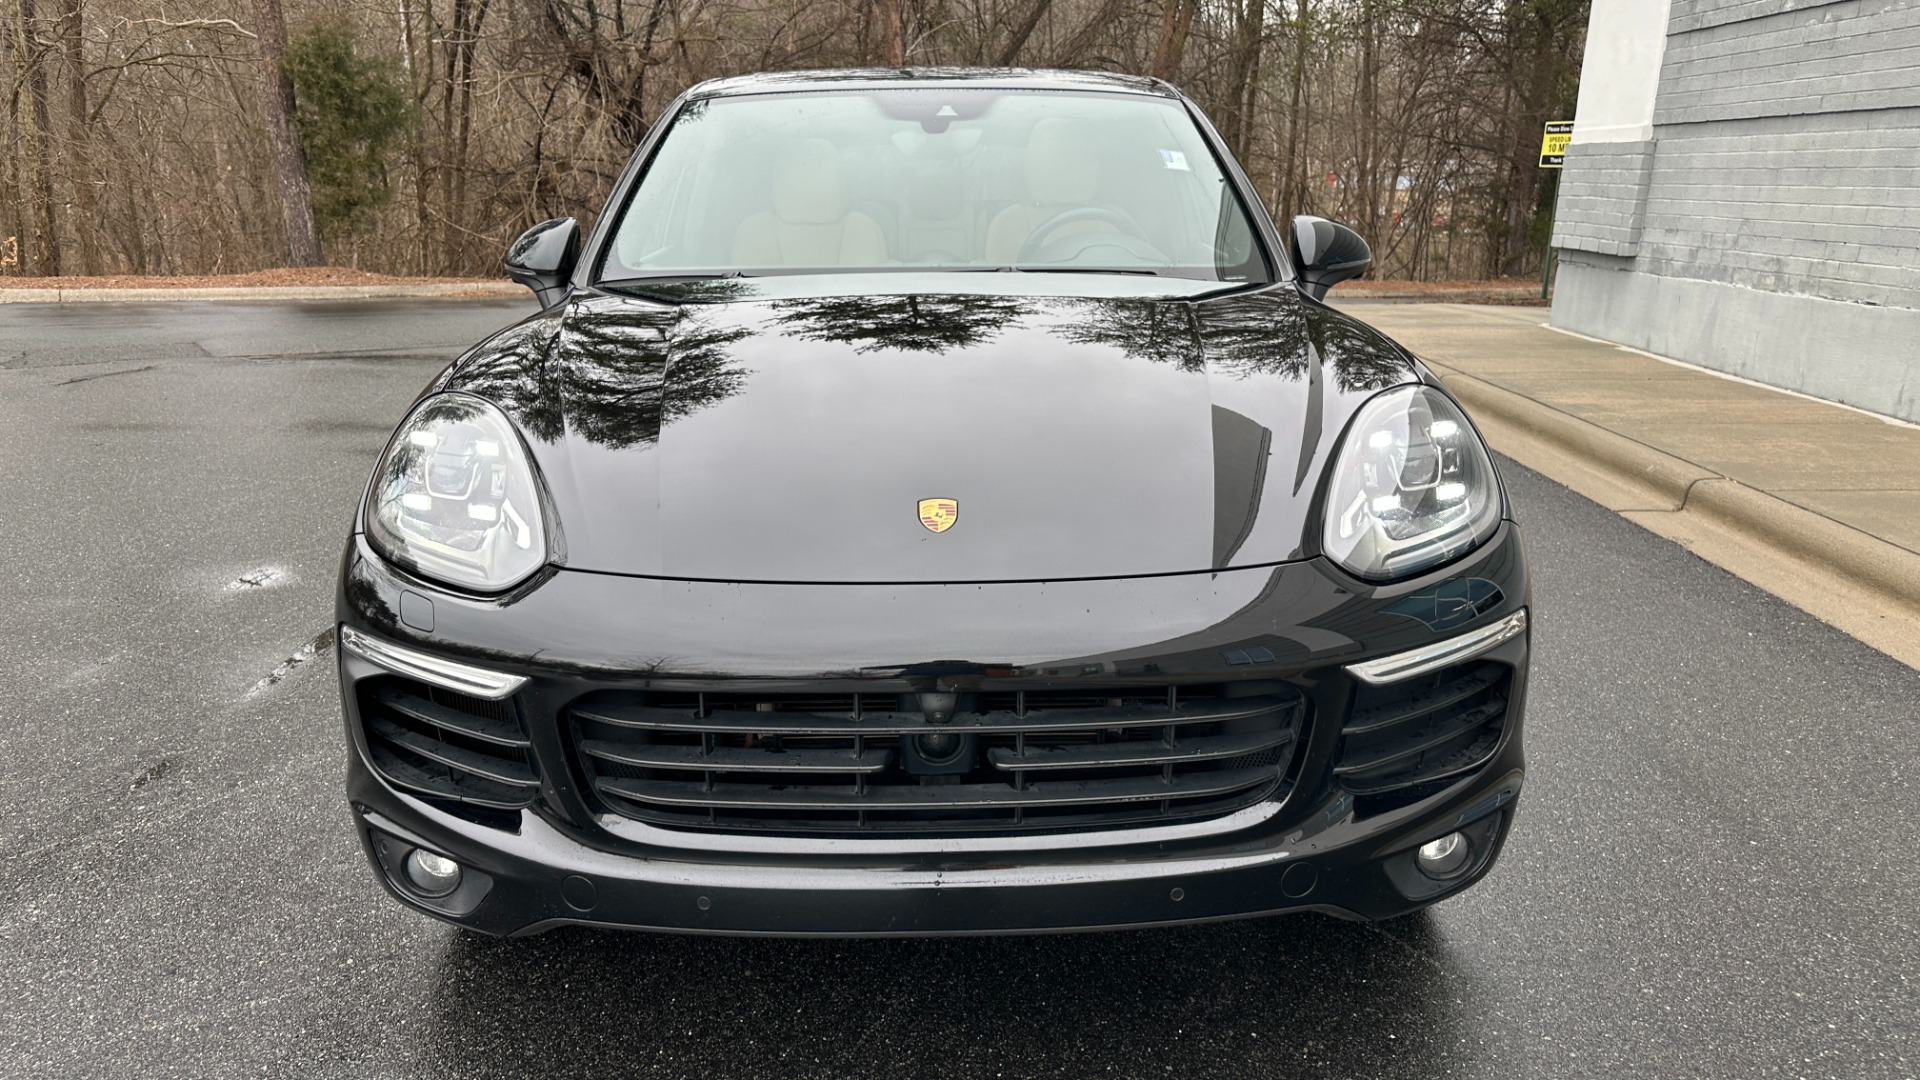 Used 2017 Porsche Cayenne S E-Hybrid PLATINUM / PREMIUM PLUS / SAFETY ASSIST for sale Sold at Formula Imports in Charlotte NC 28227 9